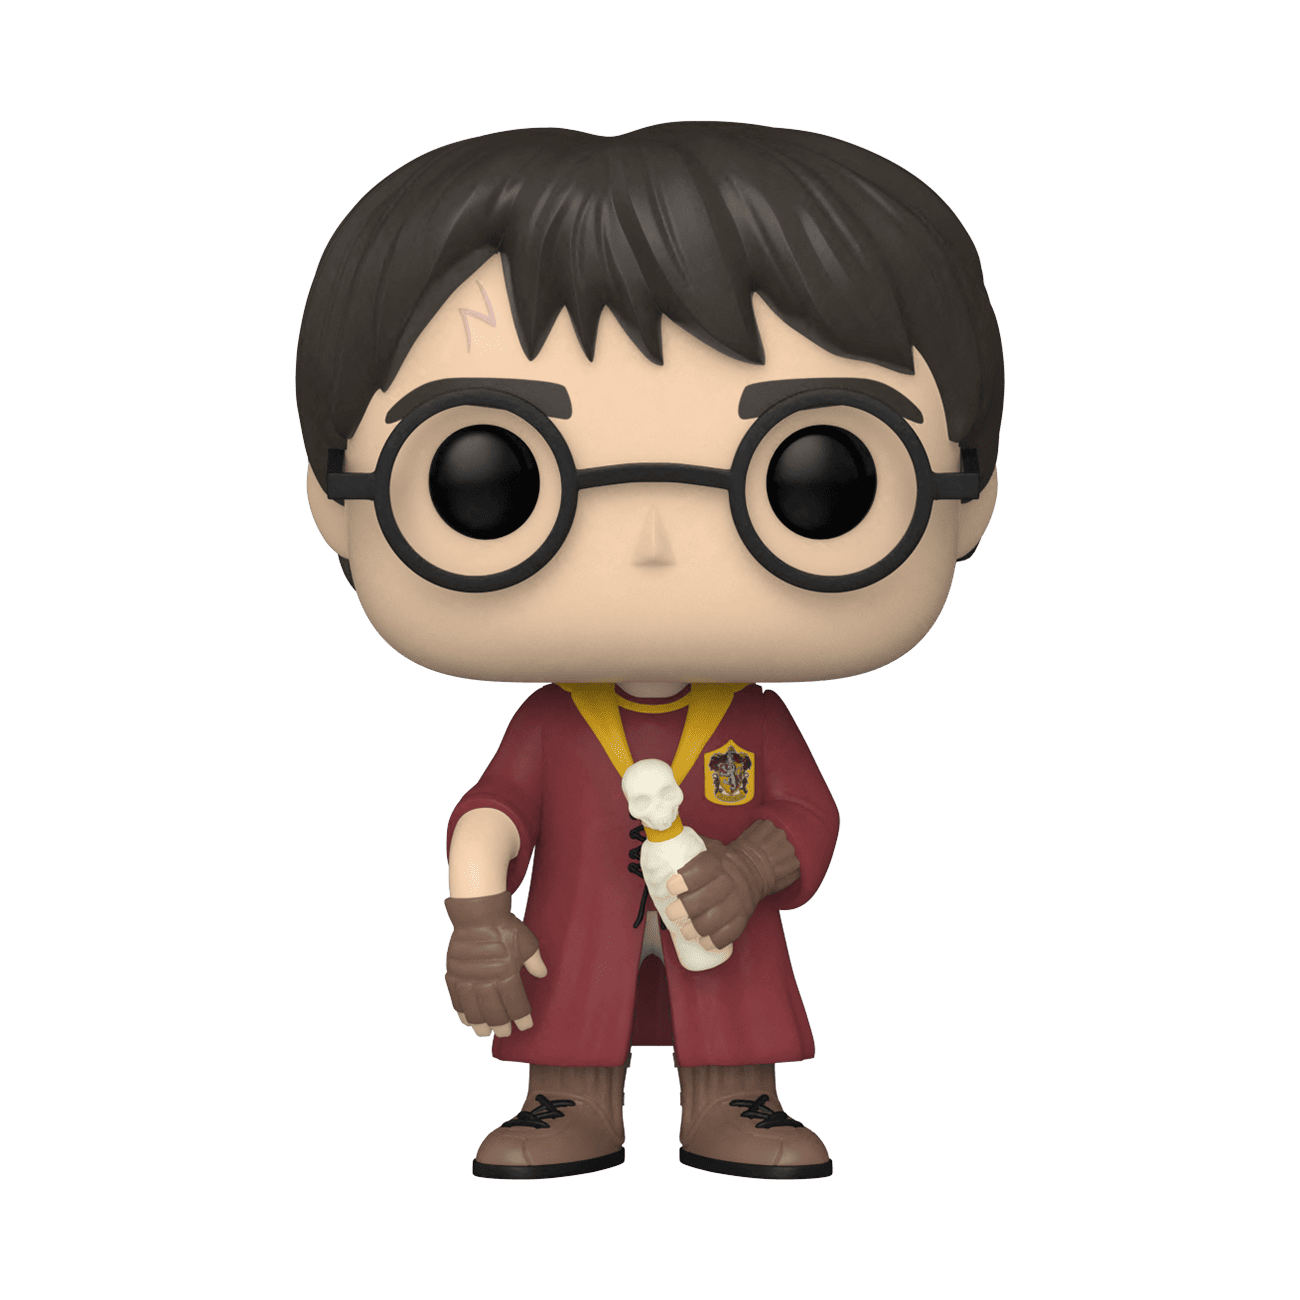 Buy Pop! Harry with Potion Bottle at Funko.